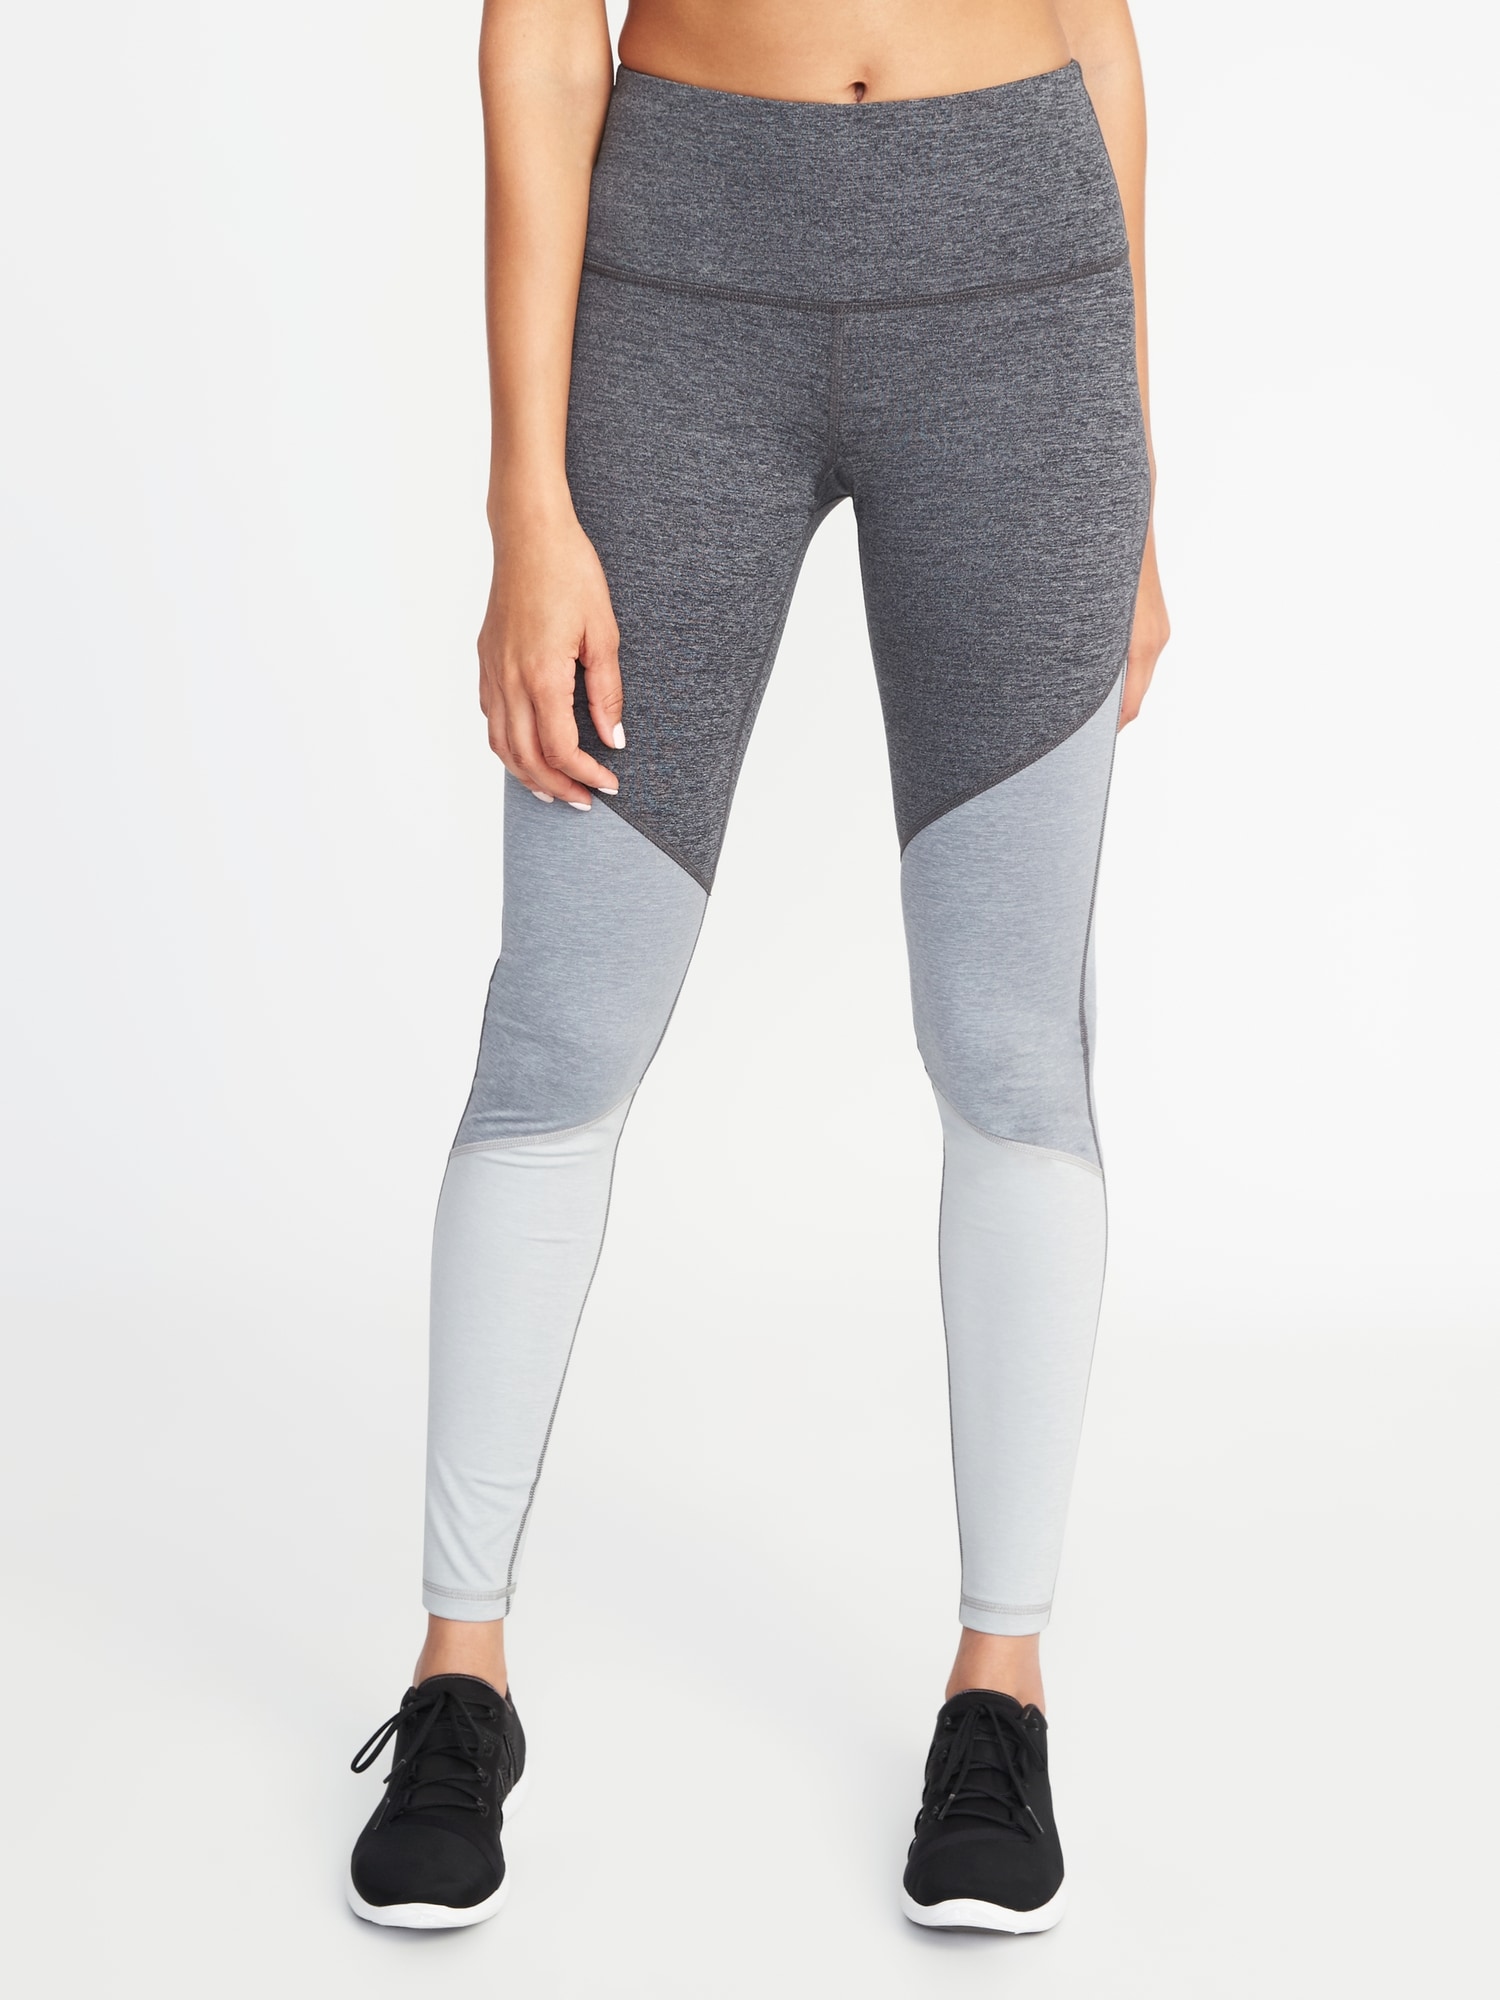 Old Navy, Pants & Jumpsuits, Old Navy Elevate Angle Color Block Legging